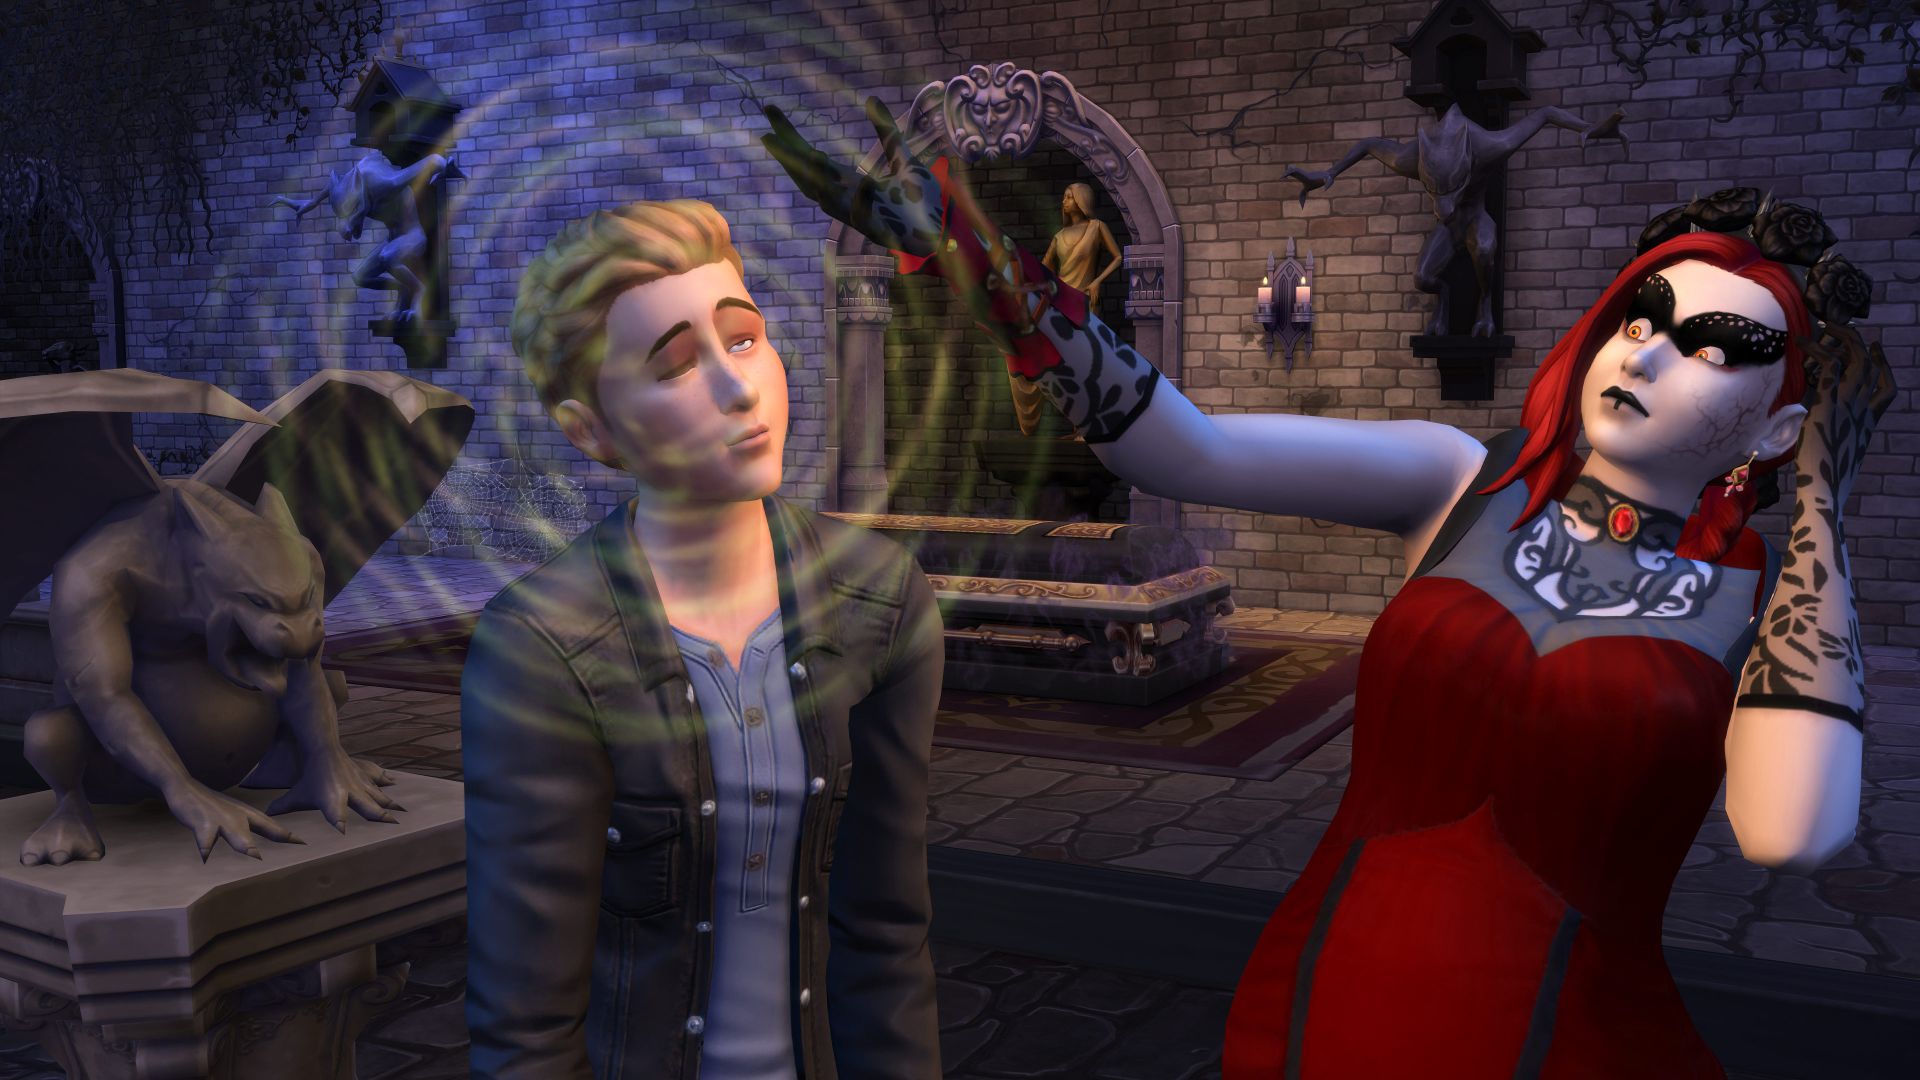 A vampire Sim is using her powers to hypnotize another Sim.